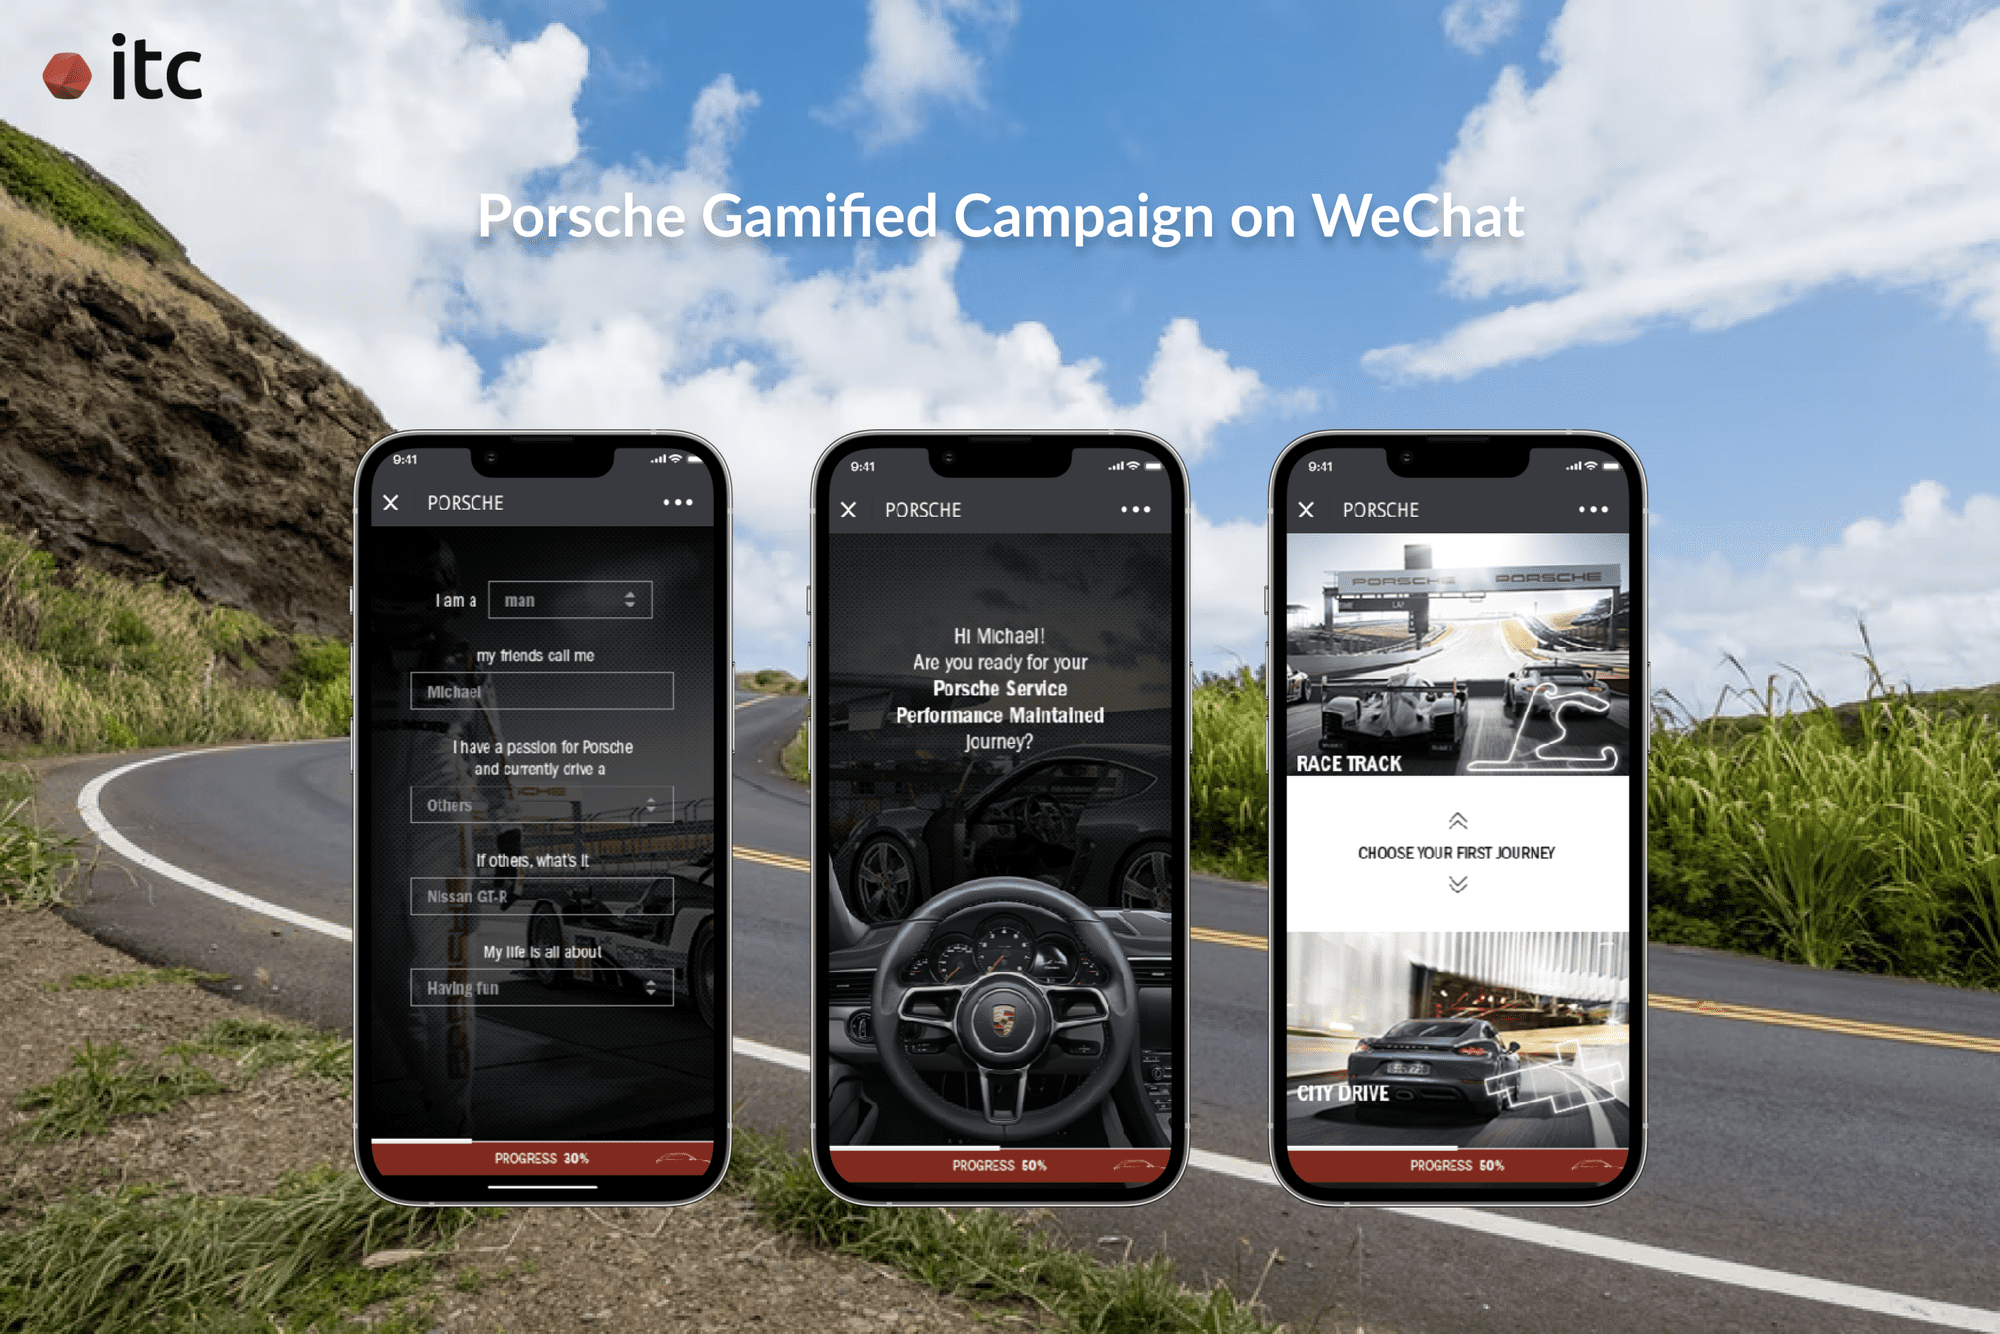 ITC helped Porsche launch a gamified campaign on WeChat